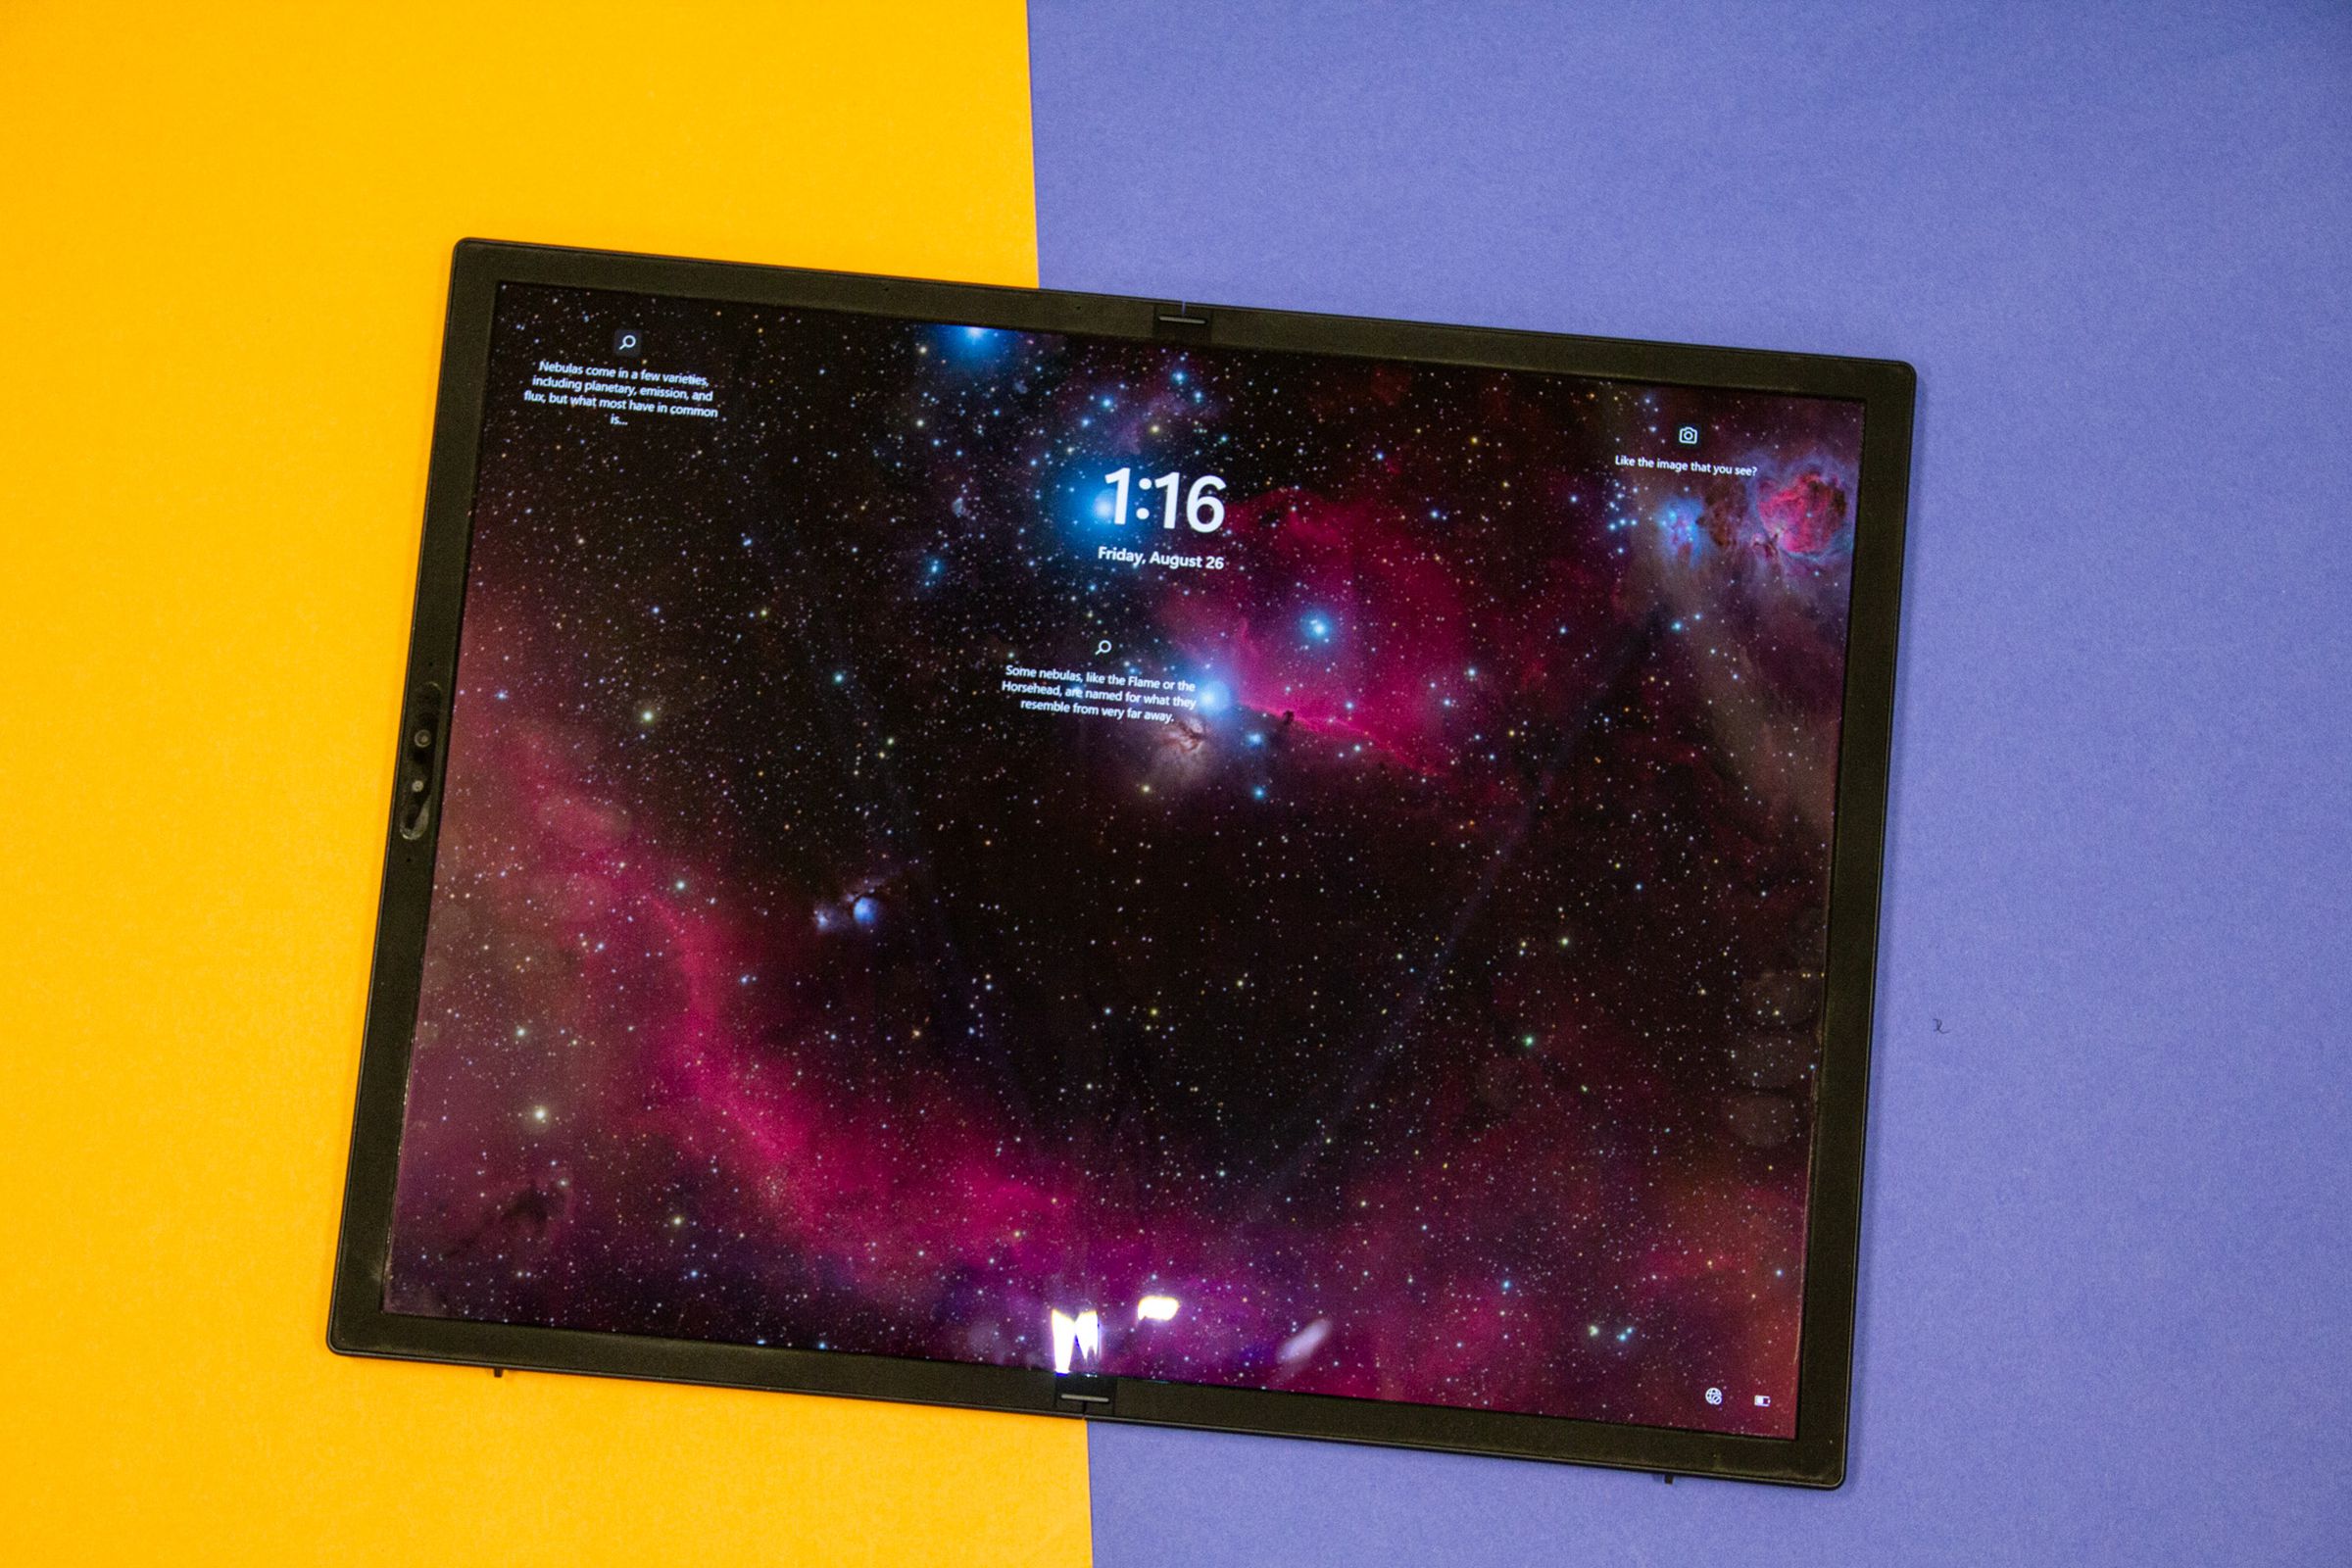 The Asus Zenbook 17 Fold OLED laid out in tablet mode, seen from above. The screen displays a picture of a galaxy and the time 1:16.